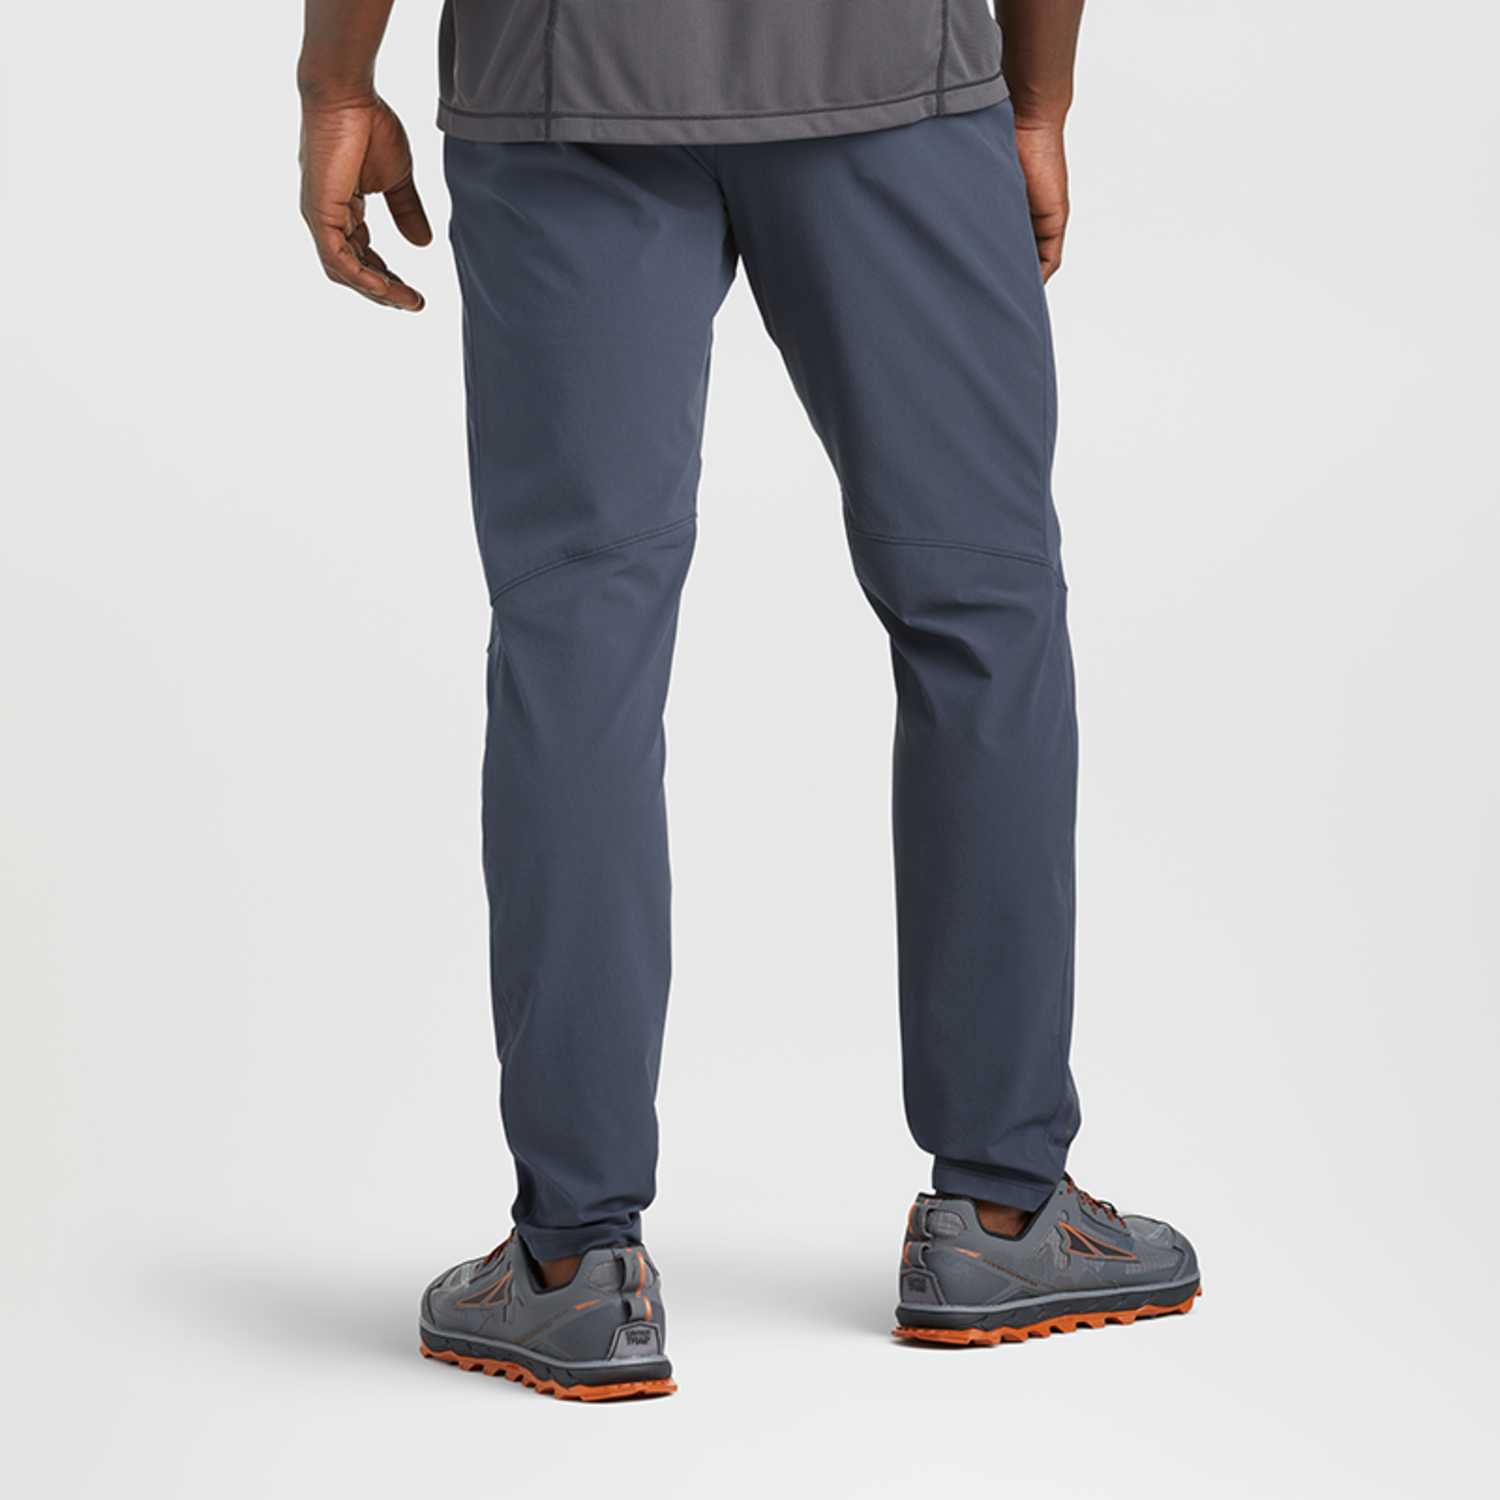 Outdoor Research Astro Pant - Men's - Clothing